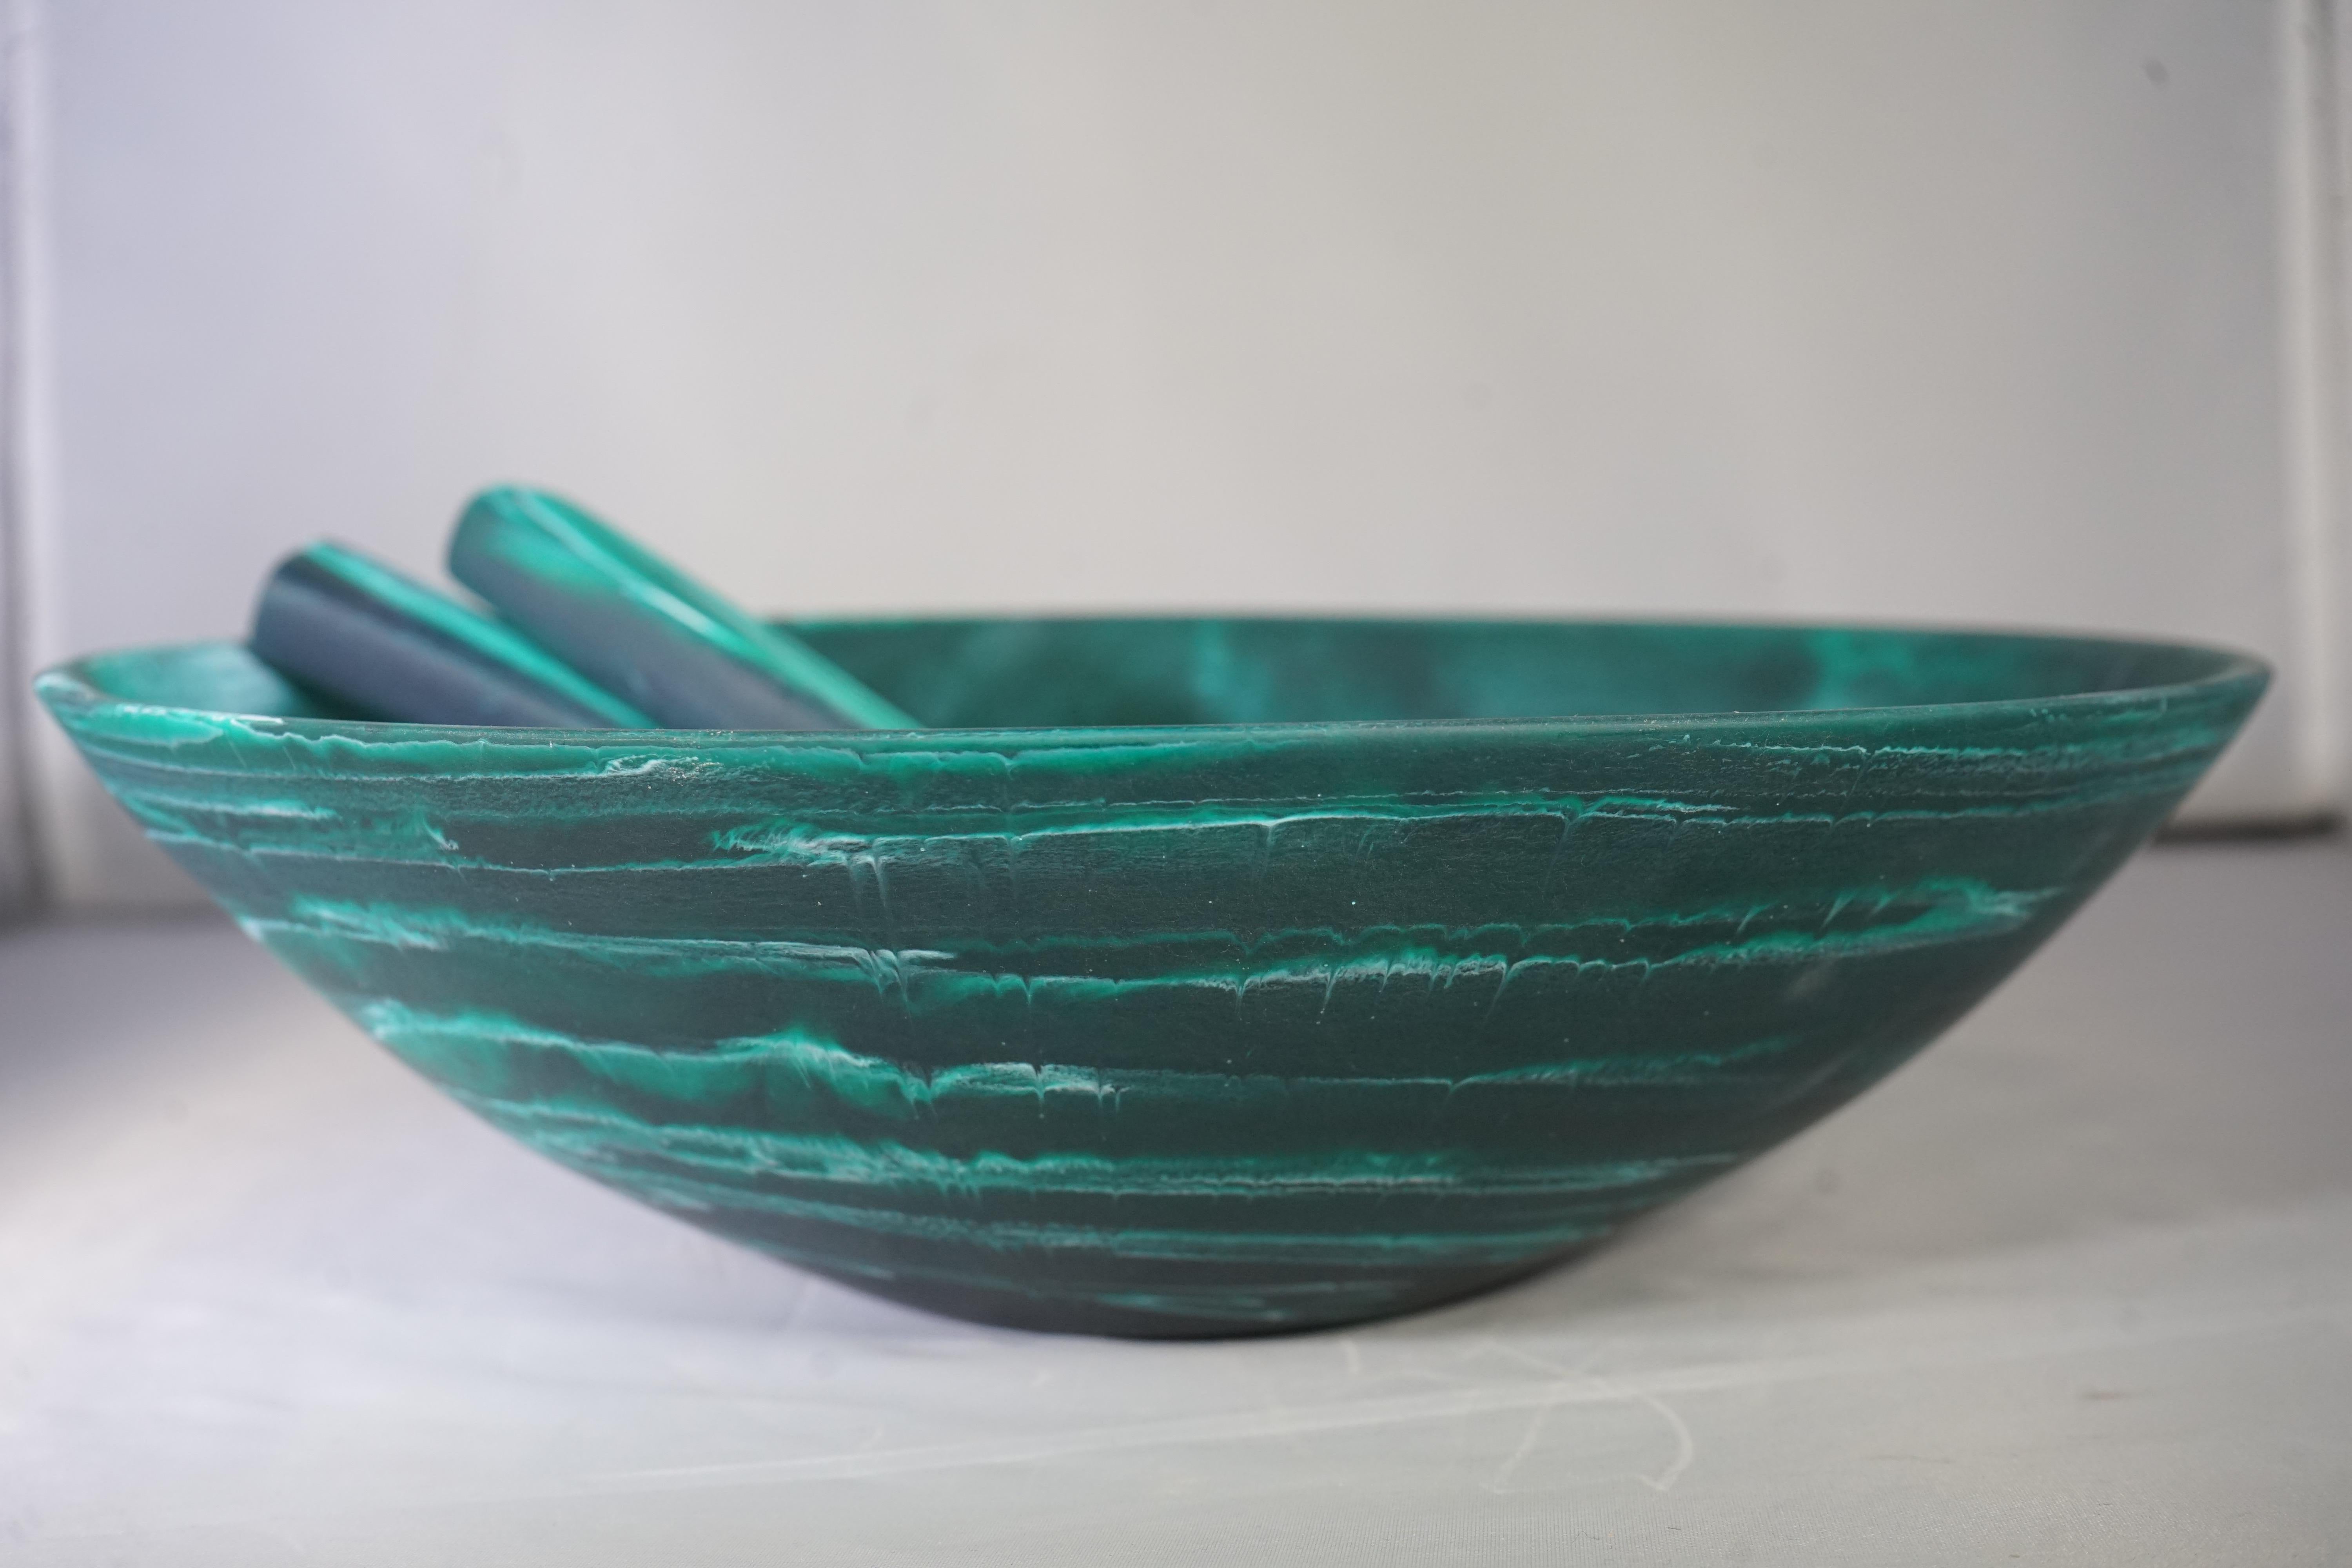 Contemporary green and white marbled resin three-piece salad bowl serving set by CDMX Design. Brand new.